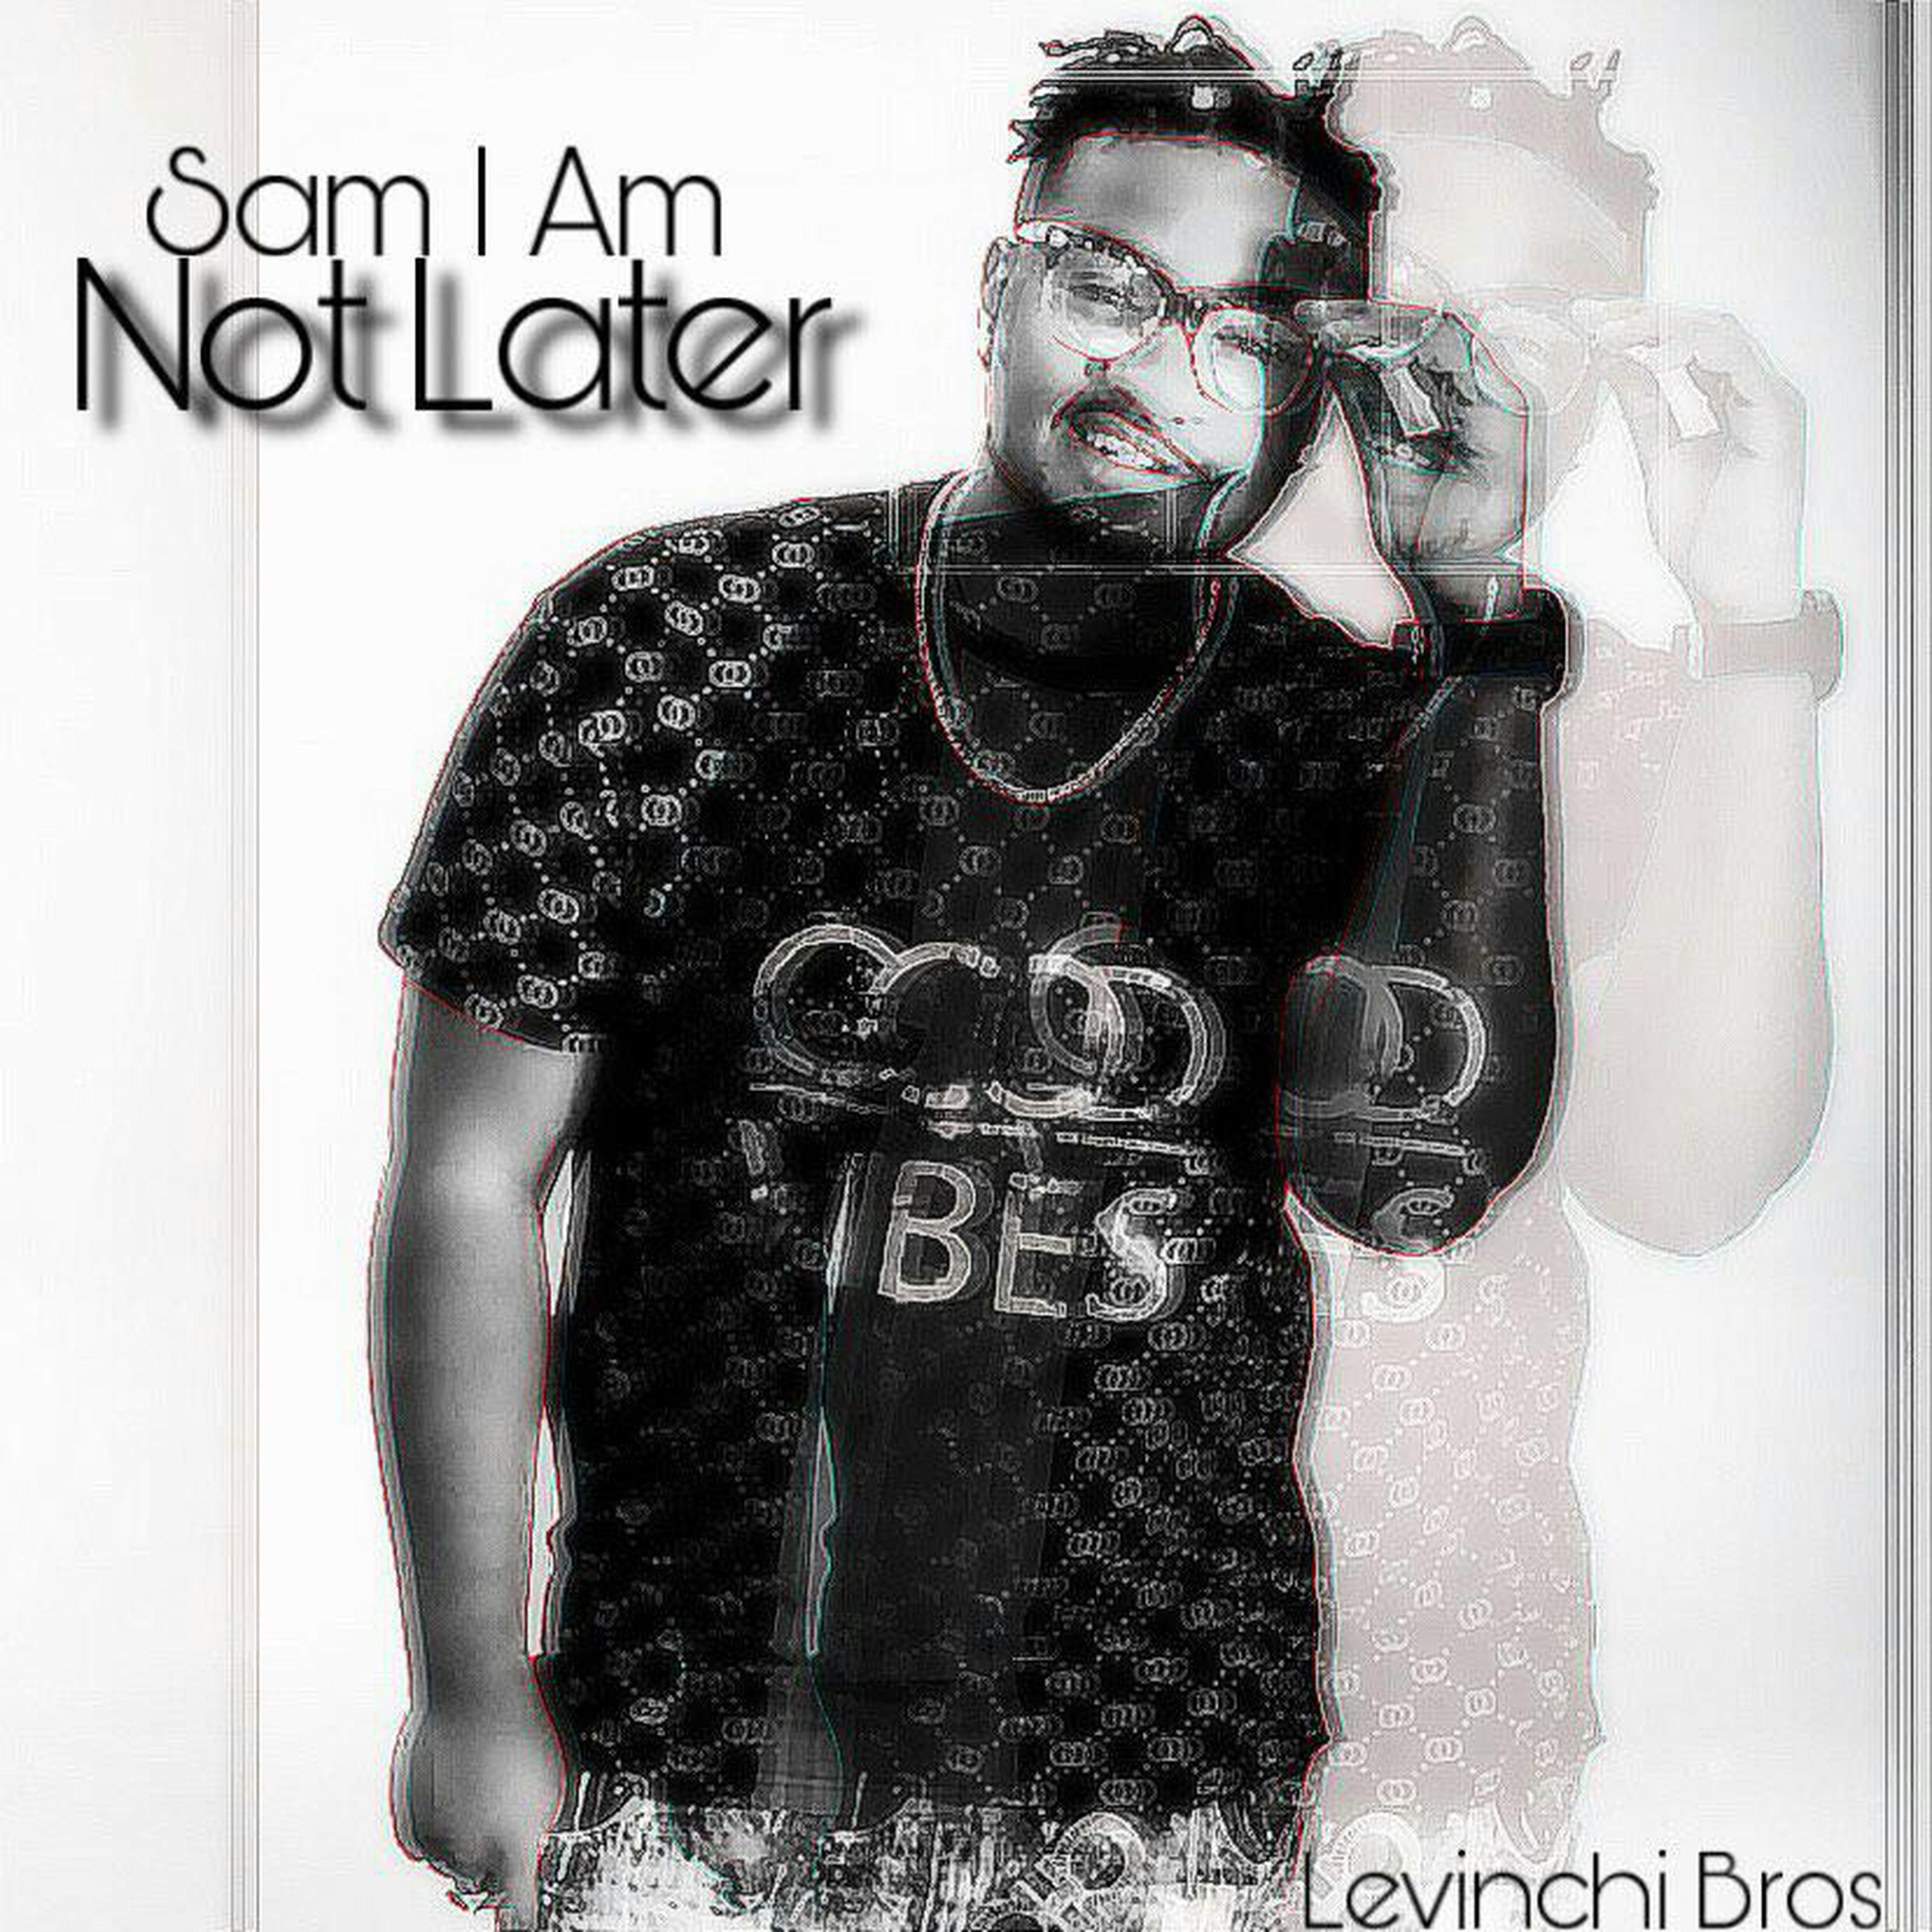 Sam I Am - Not Later